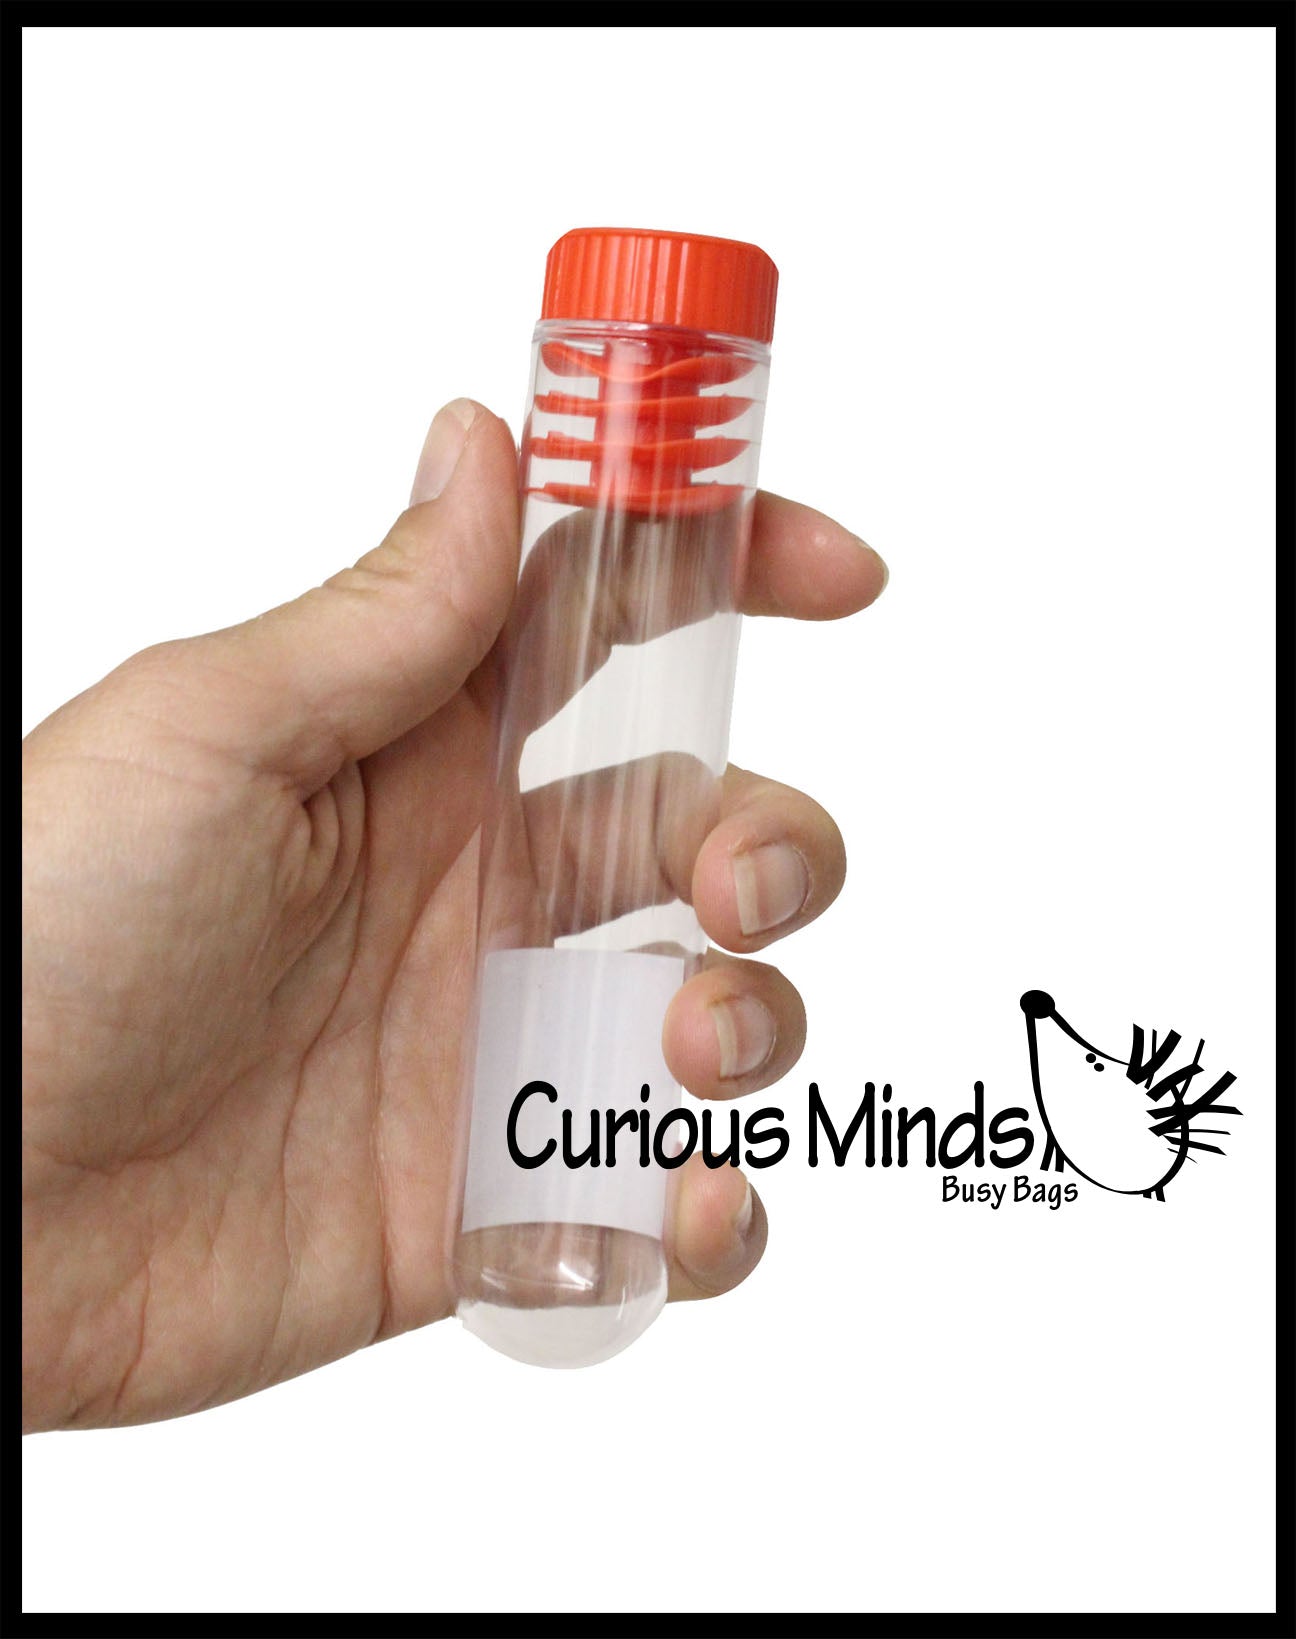 LAST CHANCE - LIMITED STOCK  - - SALE - Test Tube - Fun for Bath and Experiments